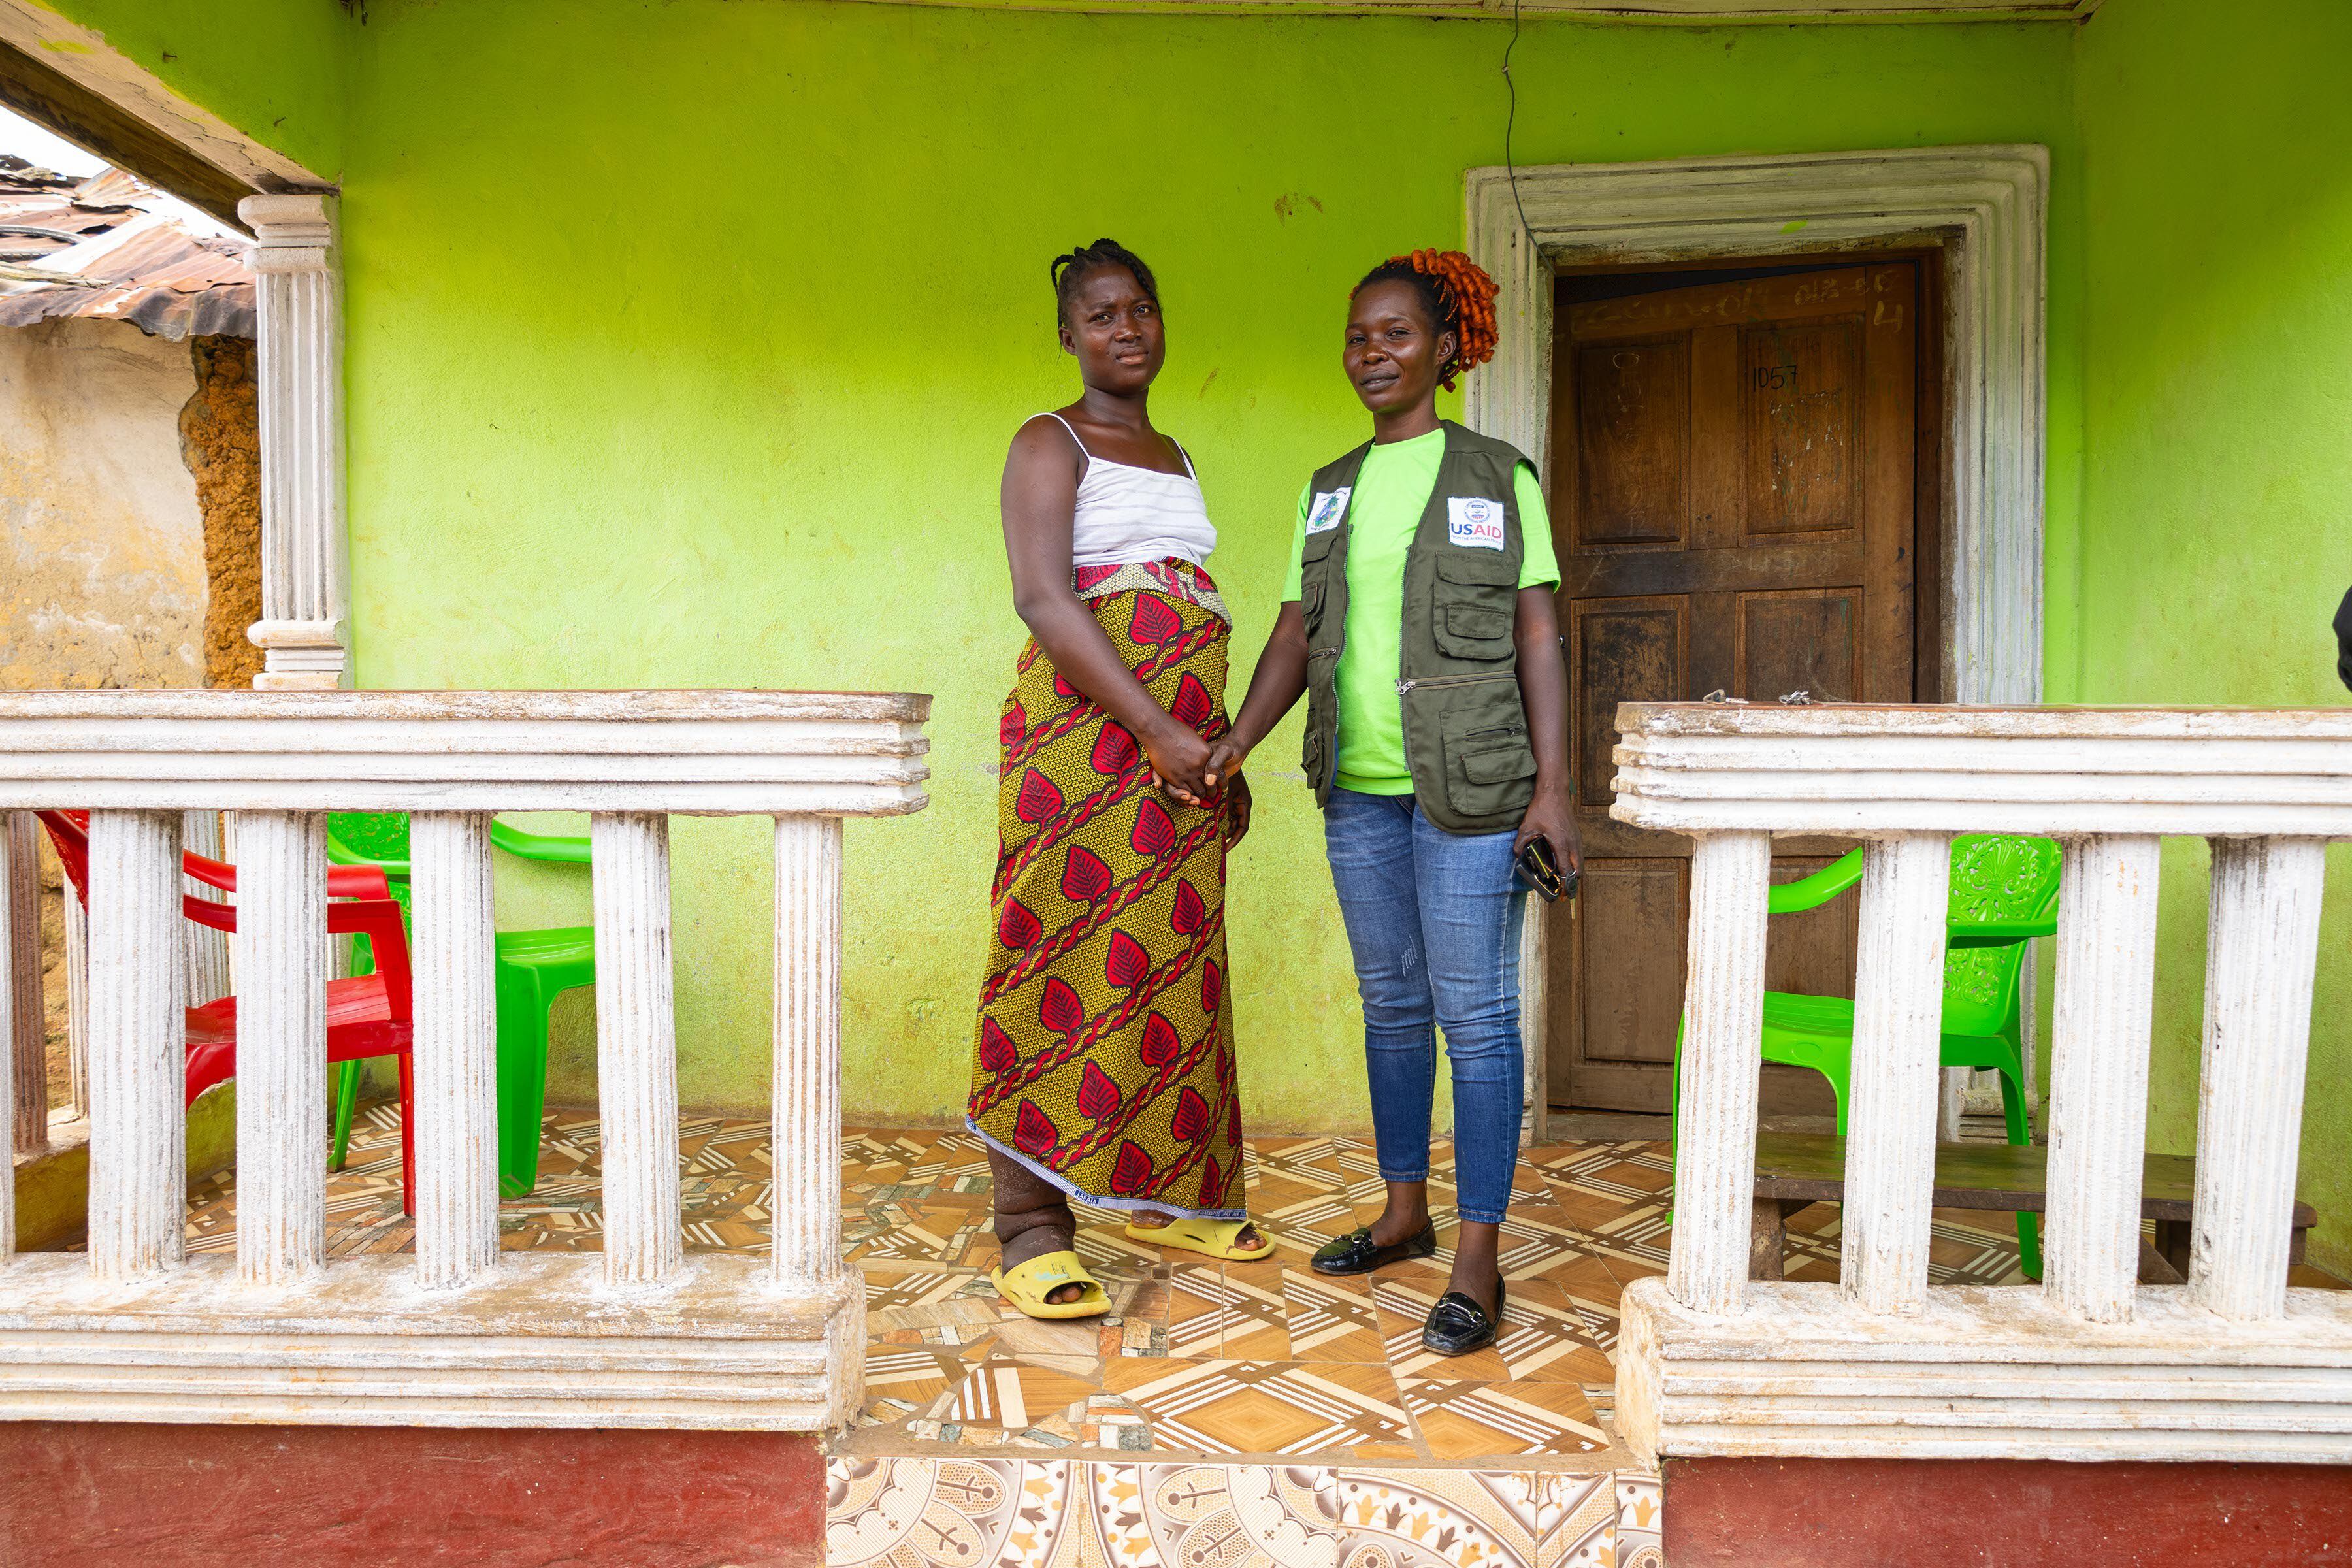 Mercy Pewee, who suffers from lymphatic filariasis, and Nowai Kerkula, a Liberian Ministry of Health worker. Kerula tours communities in Bong County to care for patients with neglected diseases and to raise awareness of prevention measures.